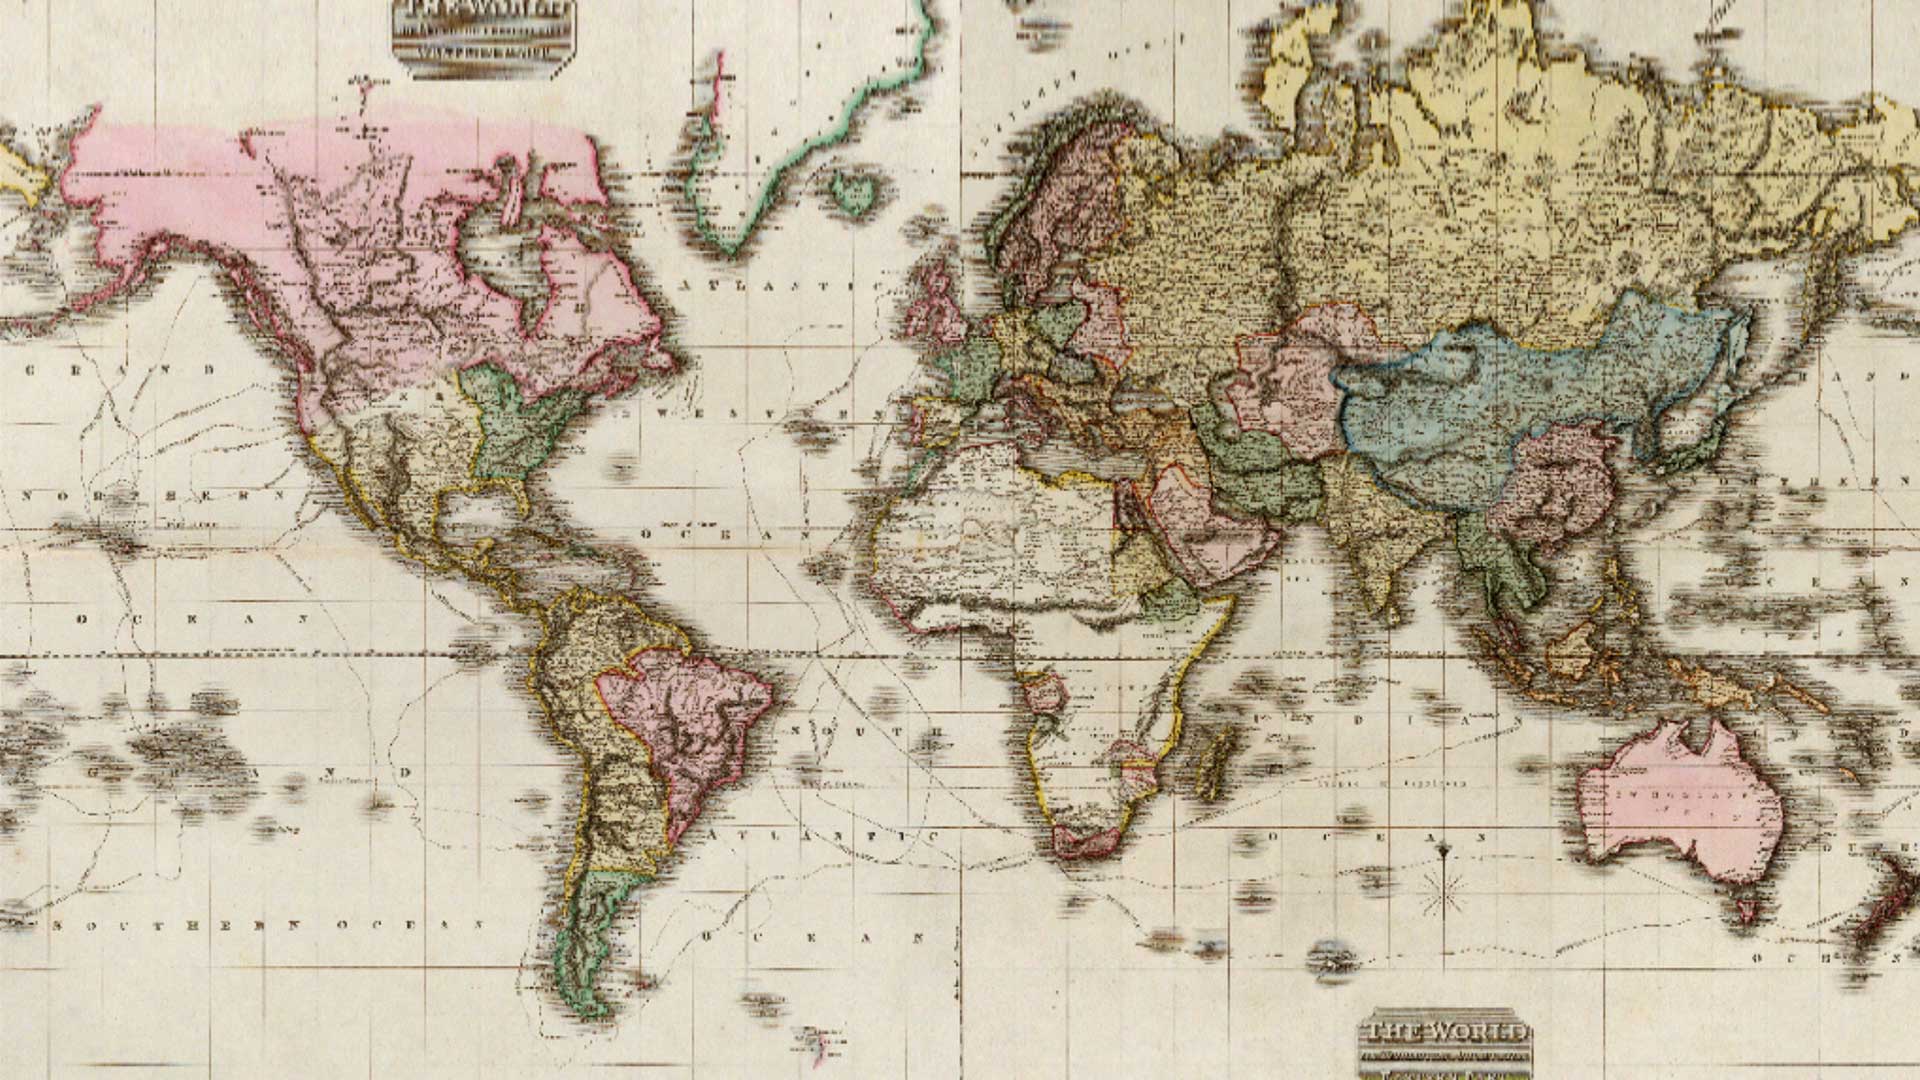 A historical map underscores how COVID-19 may change the world